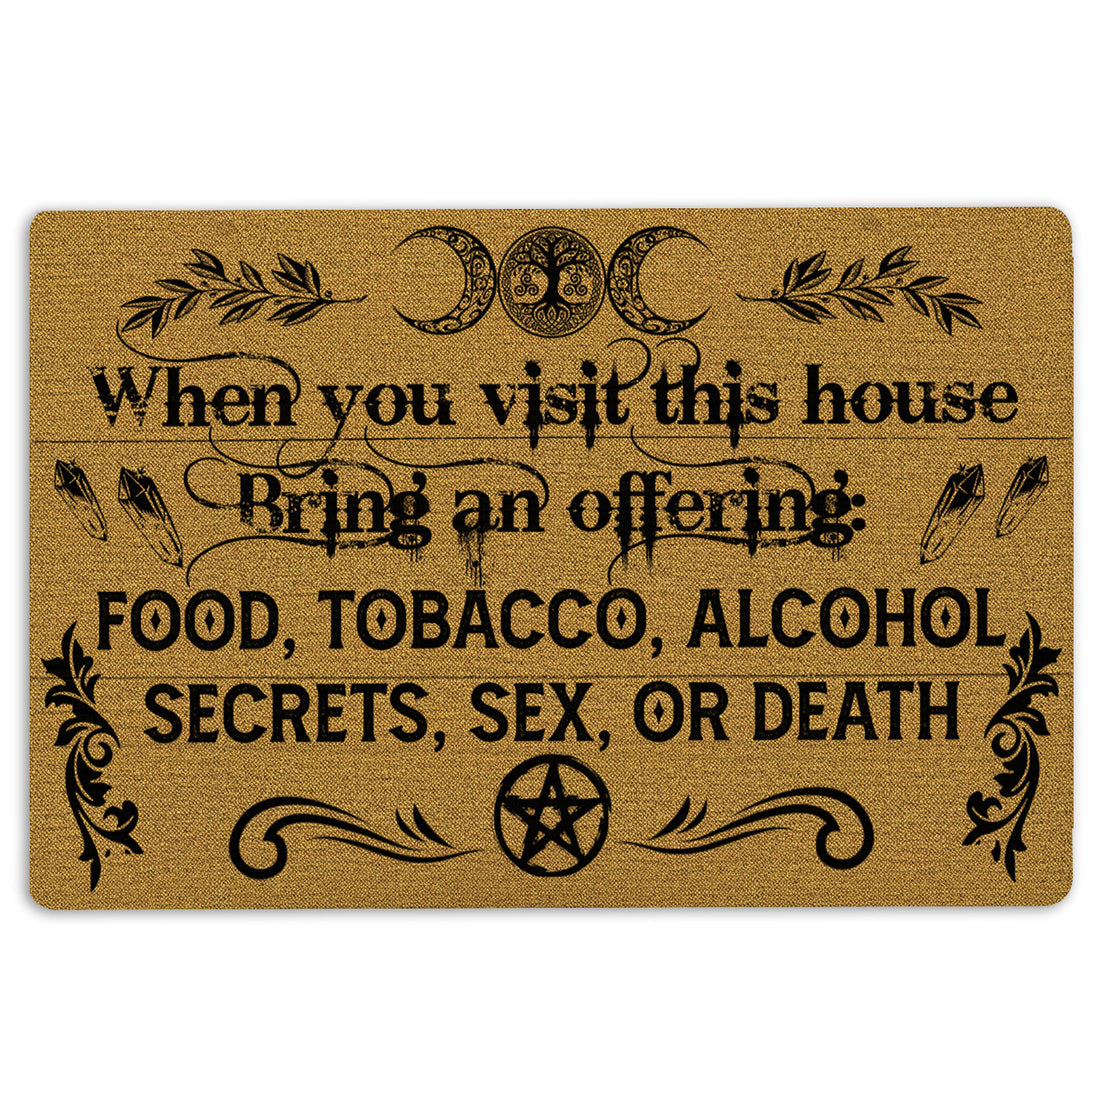 Ohaprints-Doormat-Outdoor-Indoor-Witch-When-You-Visit-House-Bring-An-Offering-Wicca-Witch-Rubber-Door-Mat-67-18'' x 30''